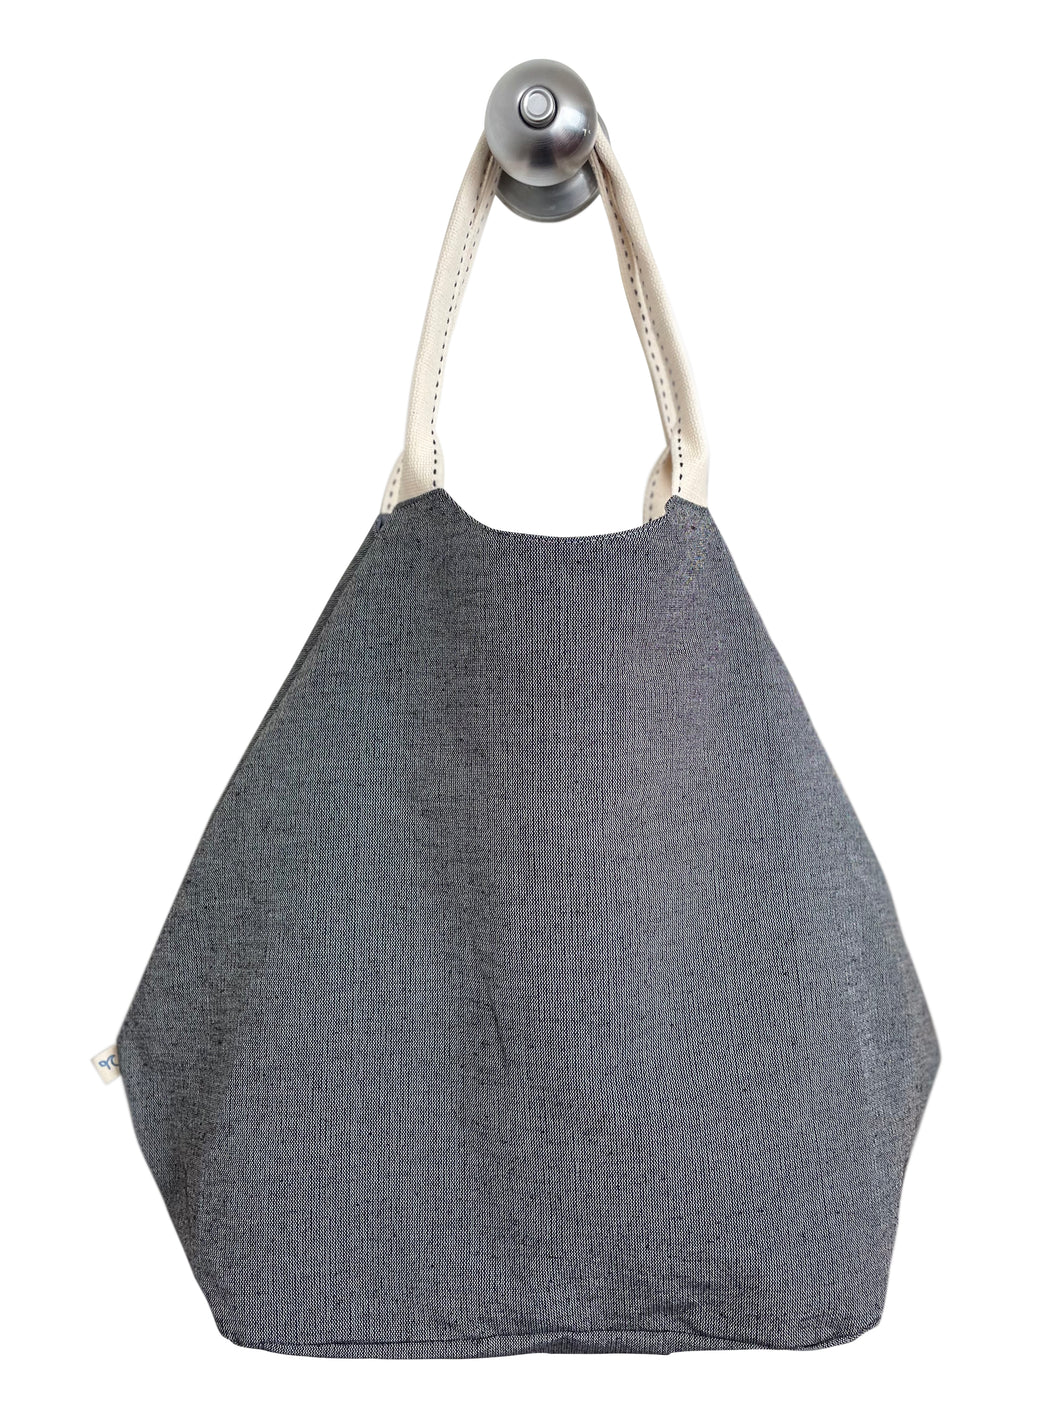 Charcoal Ecofriendly canvas bag made out of recycled plastic and textiles